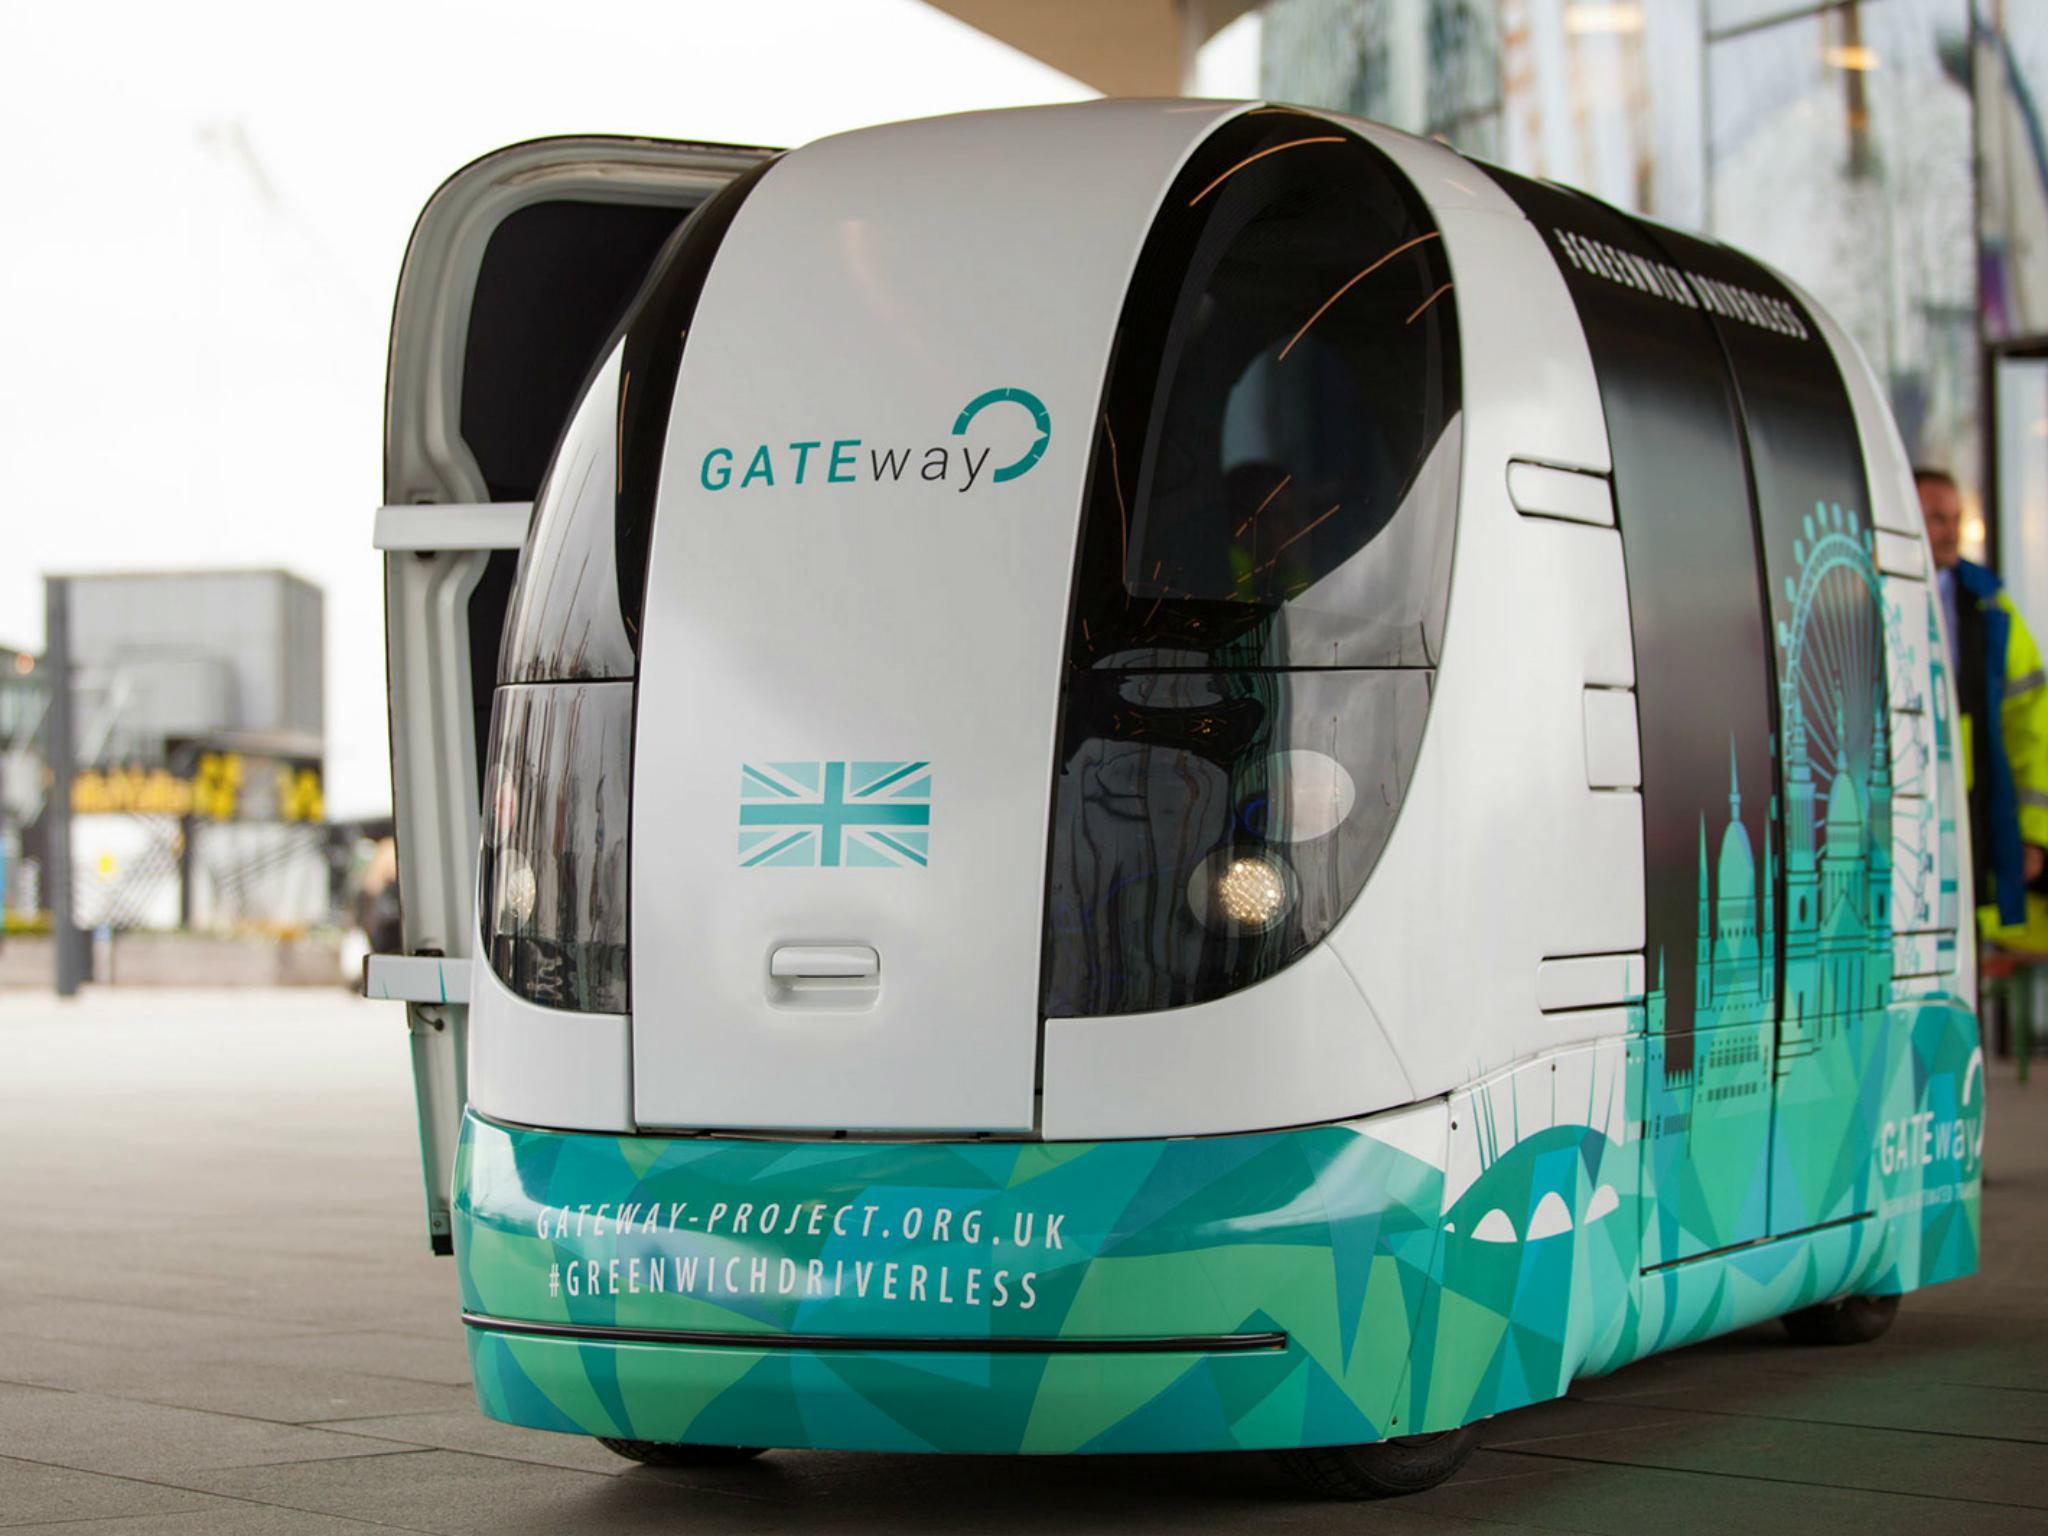 It’s hoped that the pods will improve public transport links in Greenwich